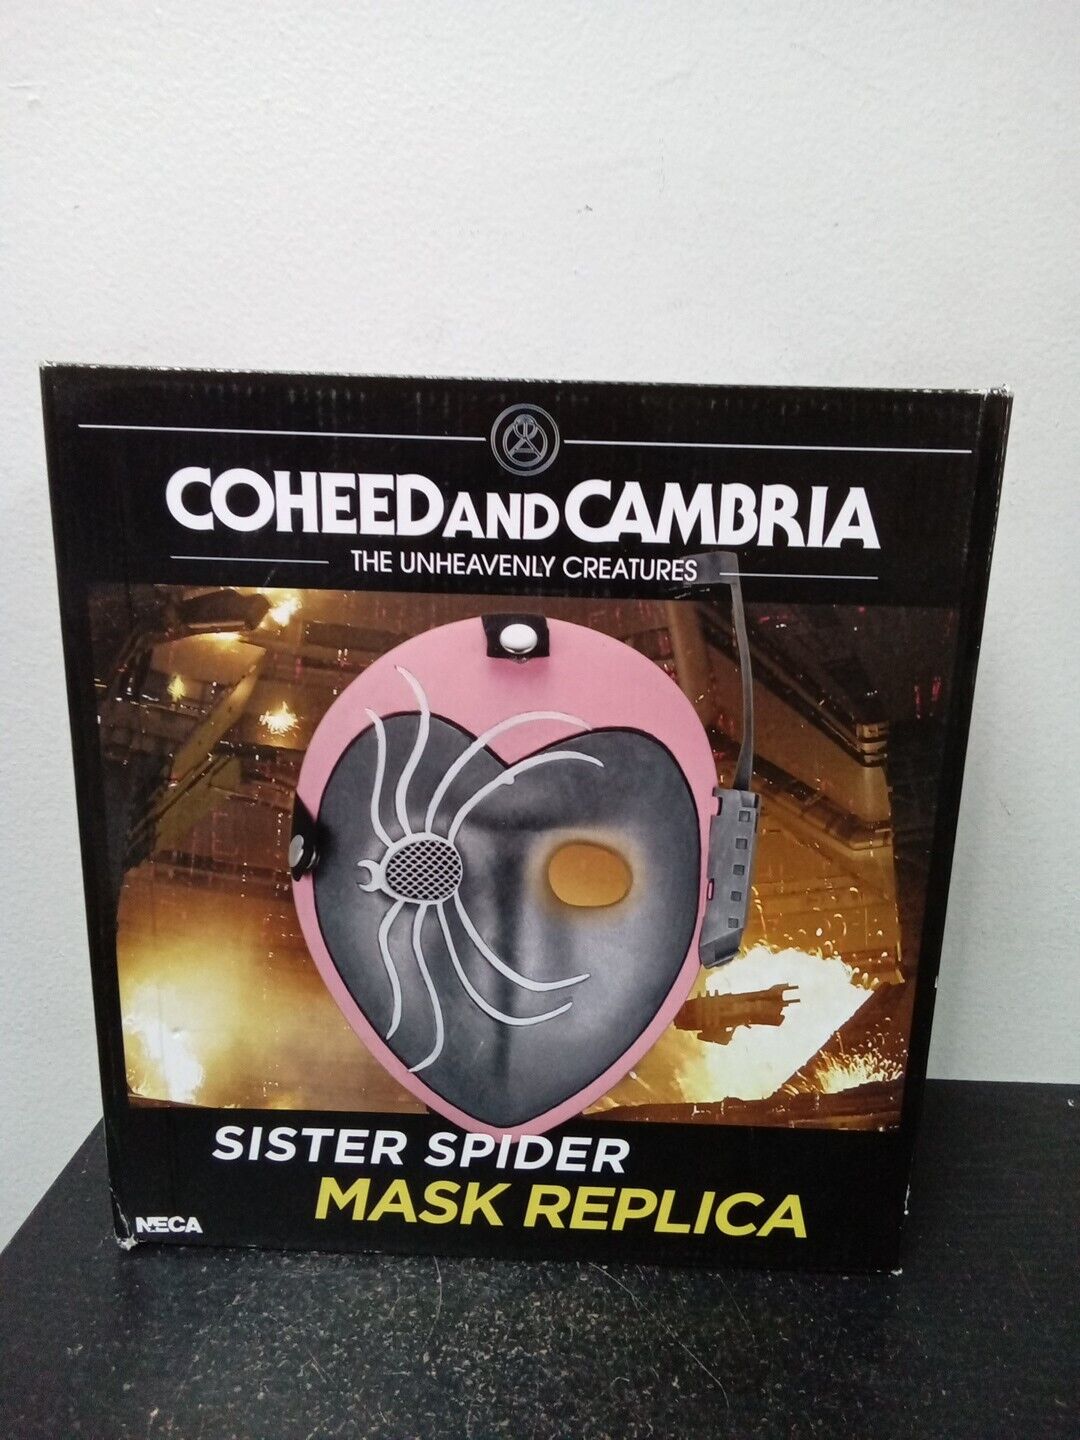 Coheed and Cambria - The Unheavenly Creatures, Sister Spider Mask Replica